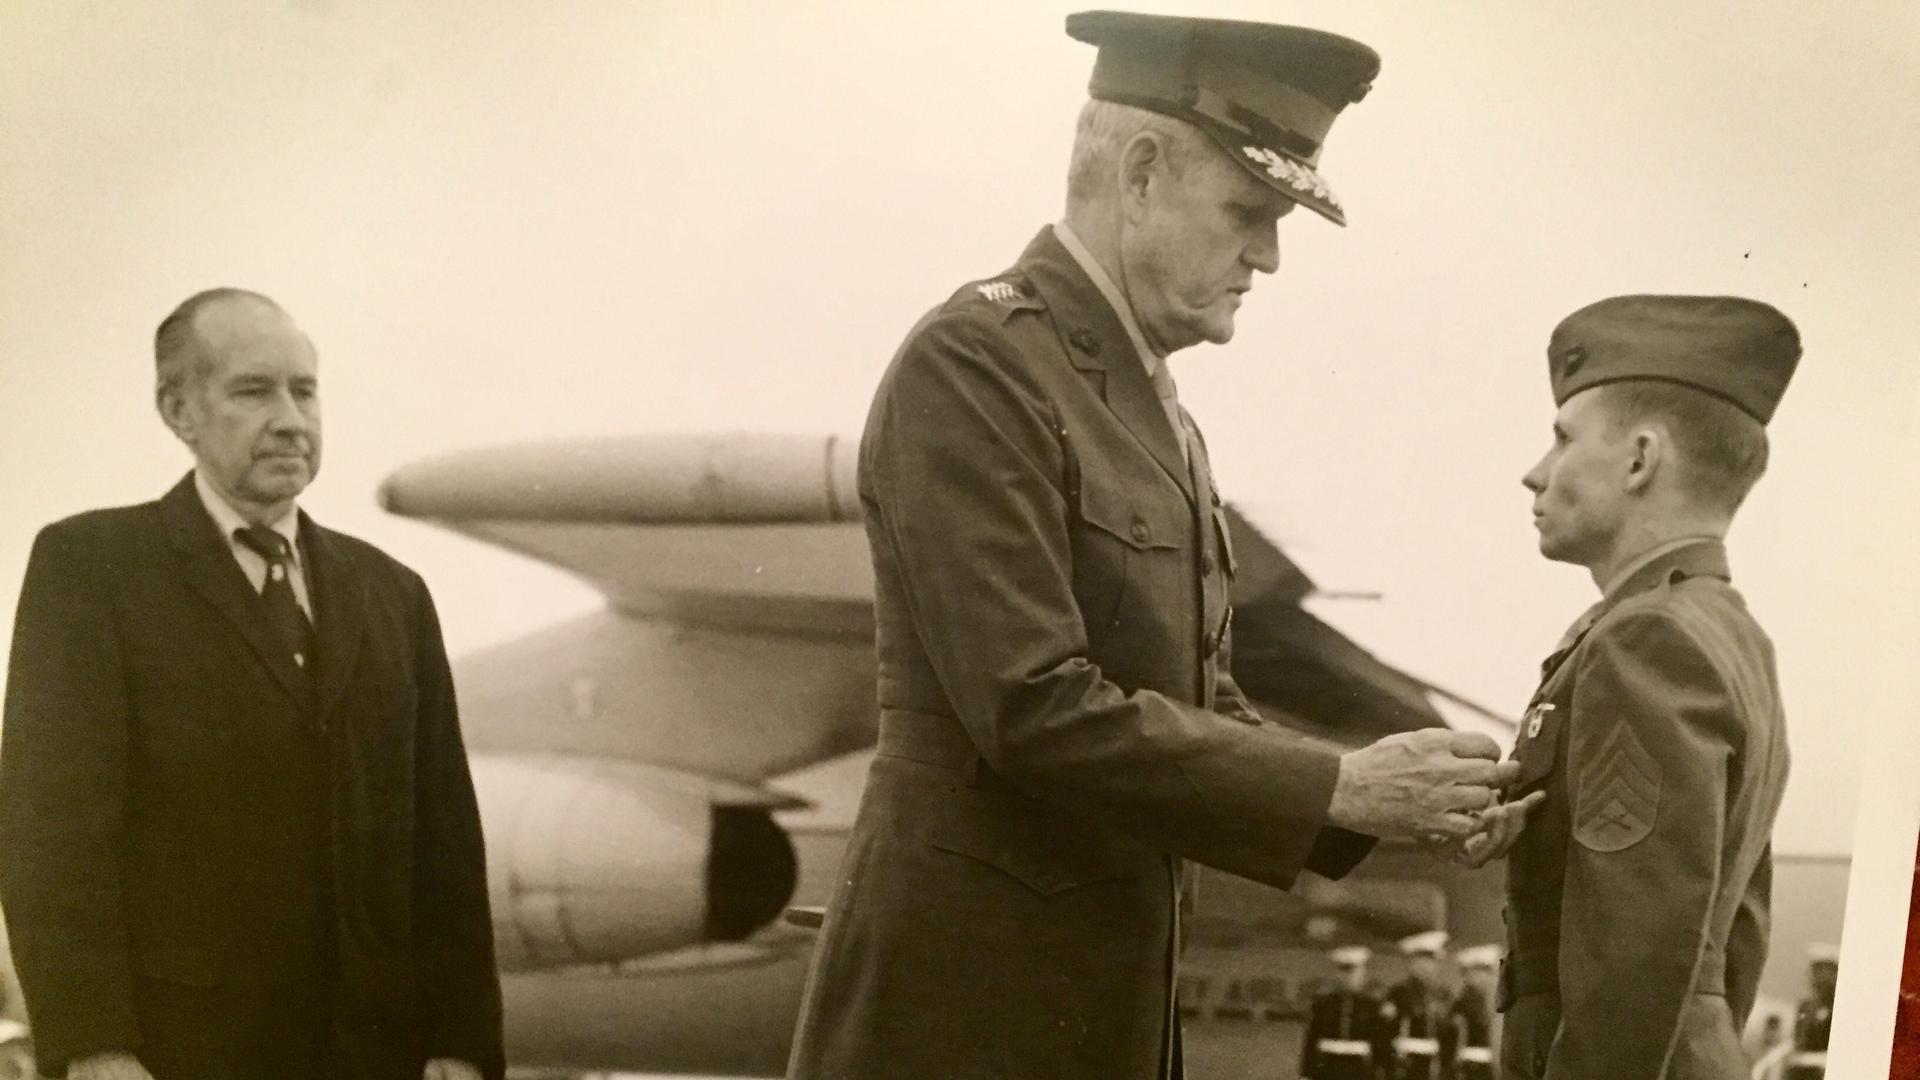 Ken Kraus receives a medal in front of an airplane 